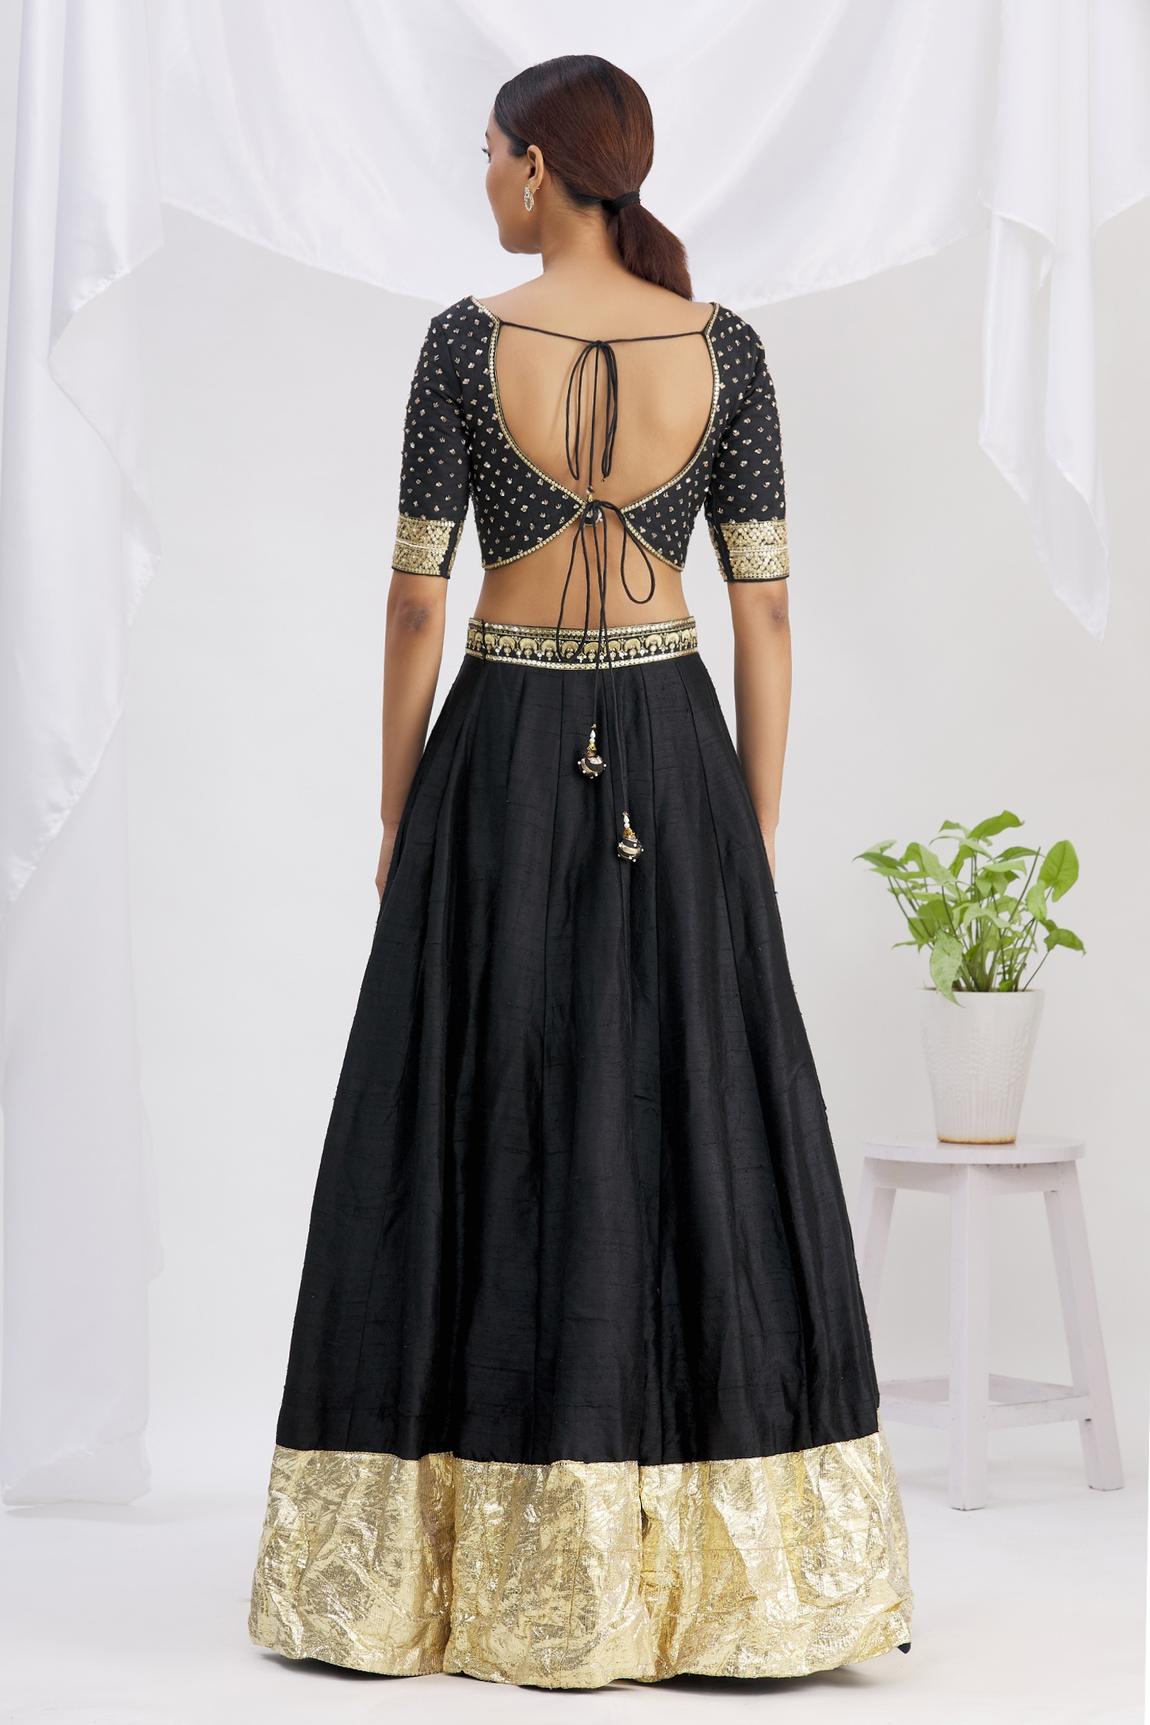 Fabron Black Sequins Embellished Raw Silk Lehenga for Women at Rs 3300 |  सिल्क लहंगा in Surat | ID: 12832370133